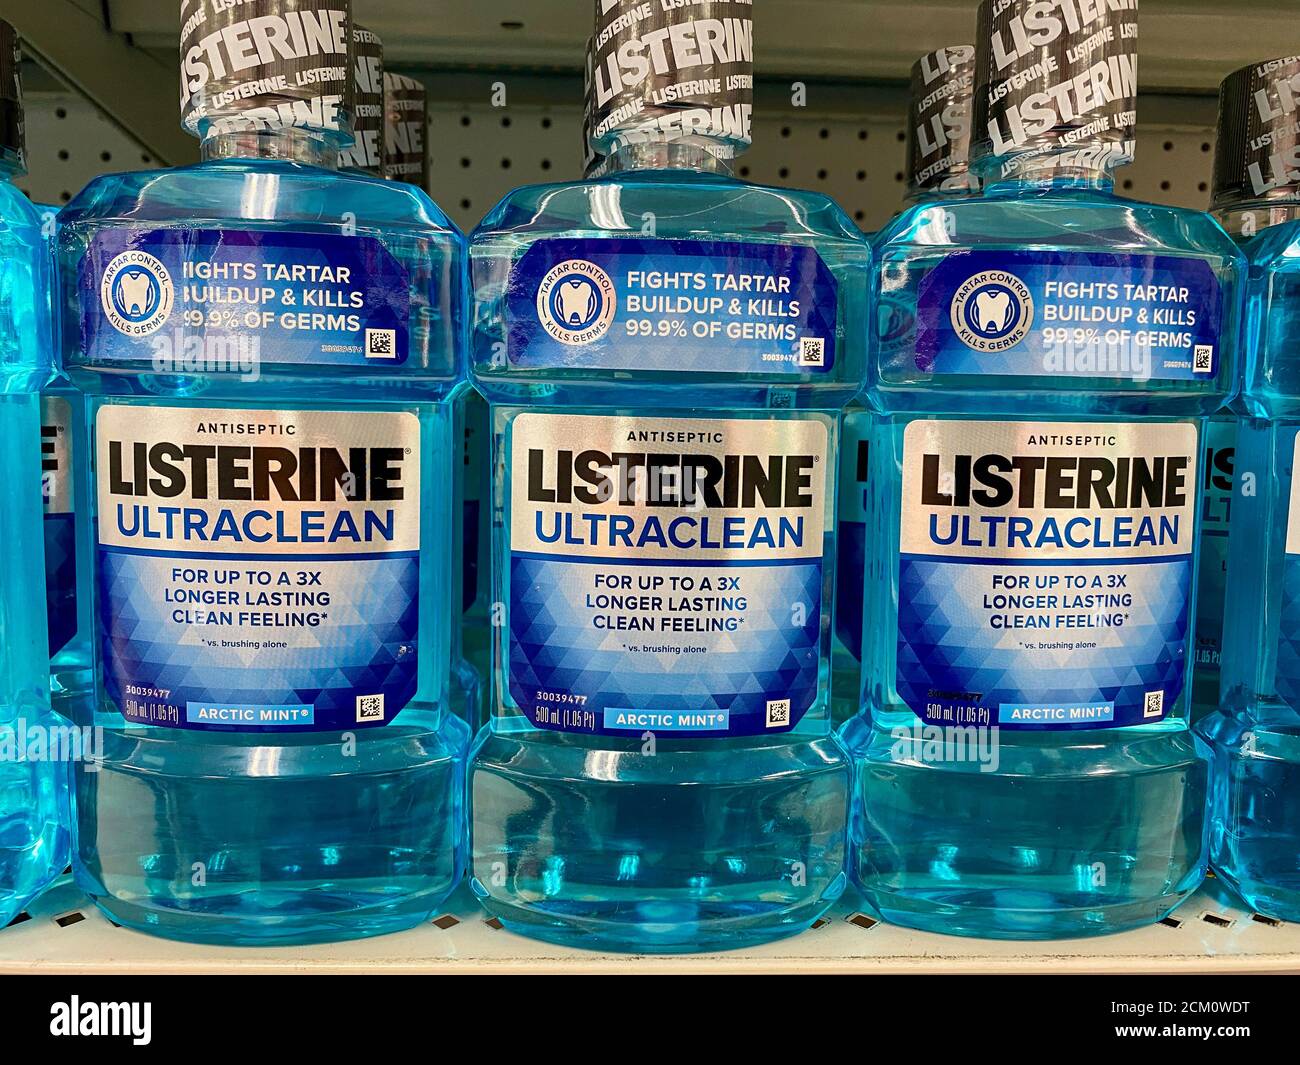 Listerine mouth wash bottles on a store shelf Stock Photo